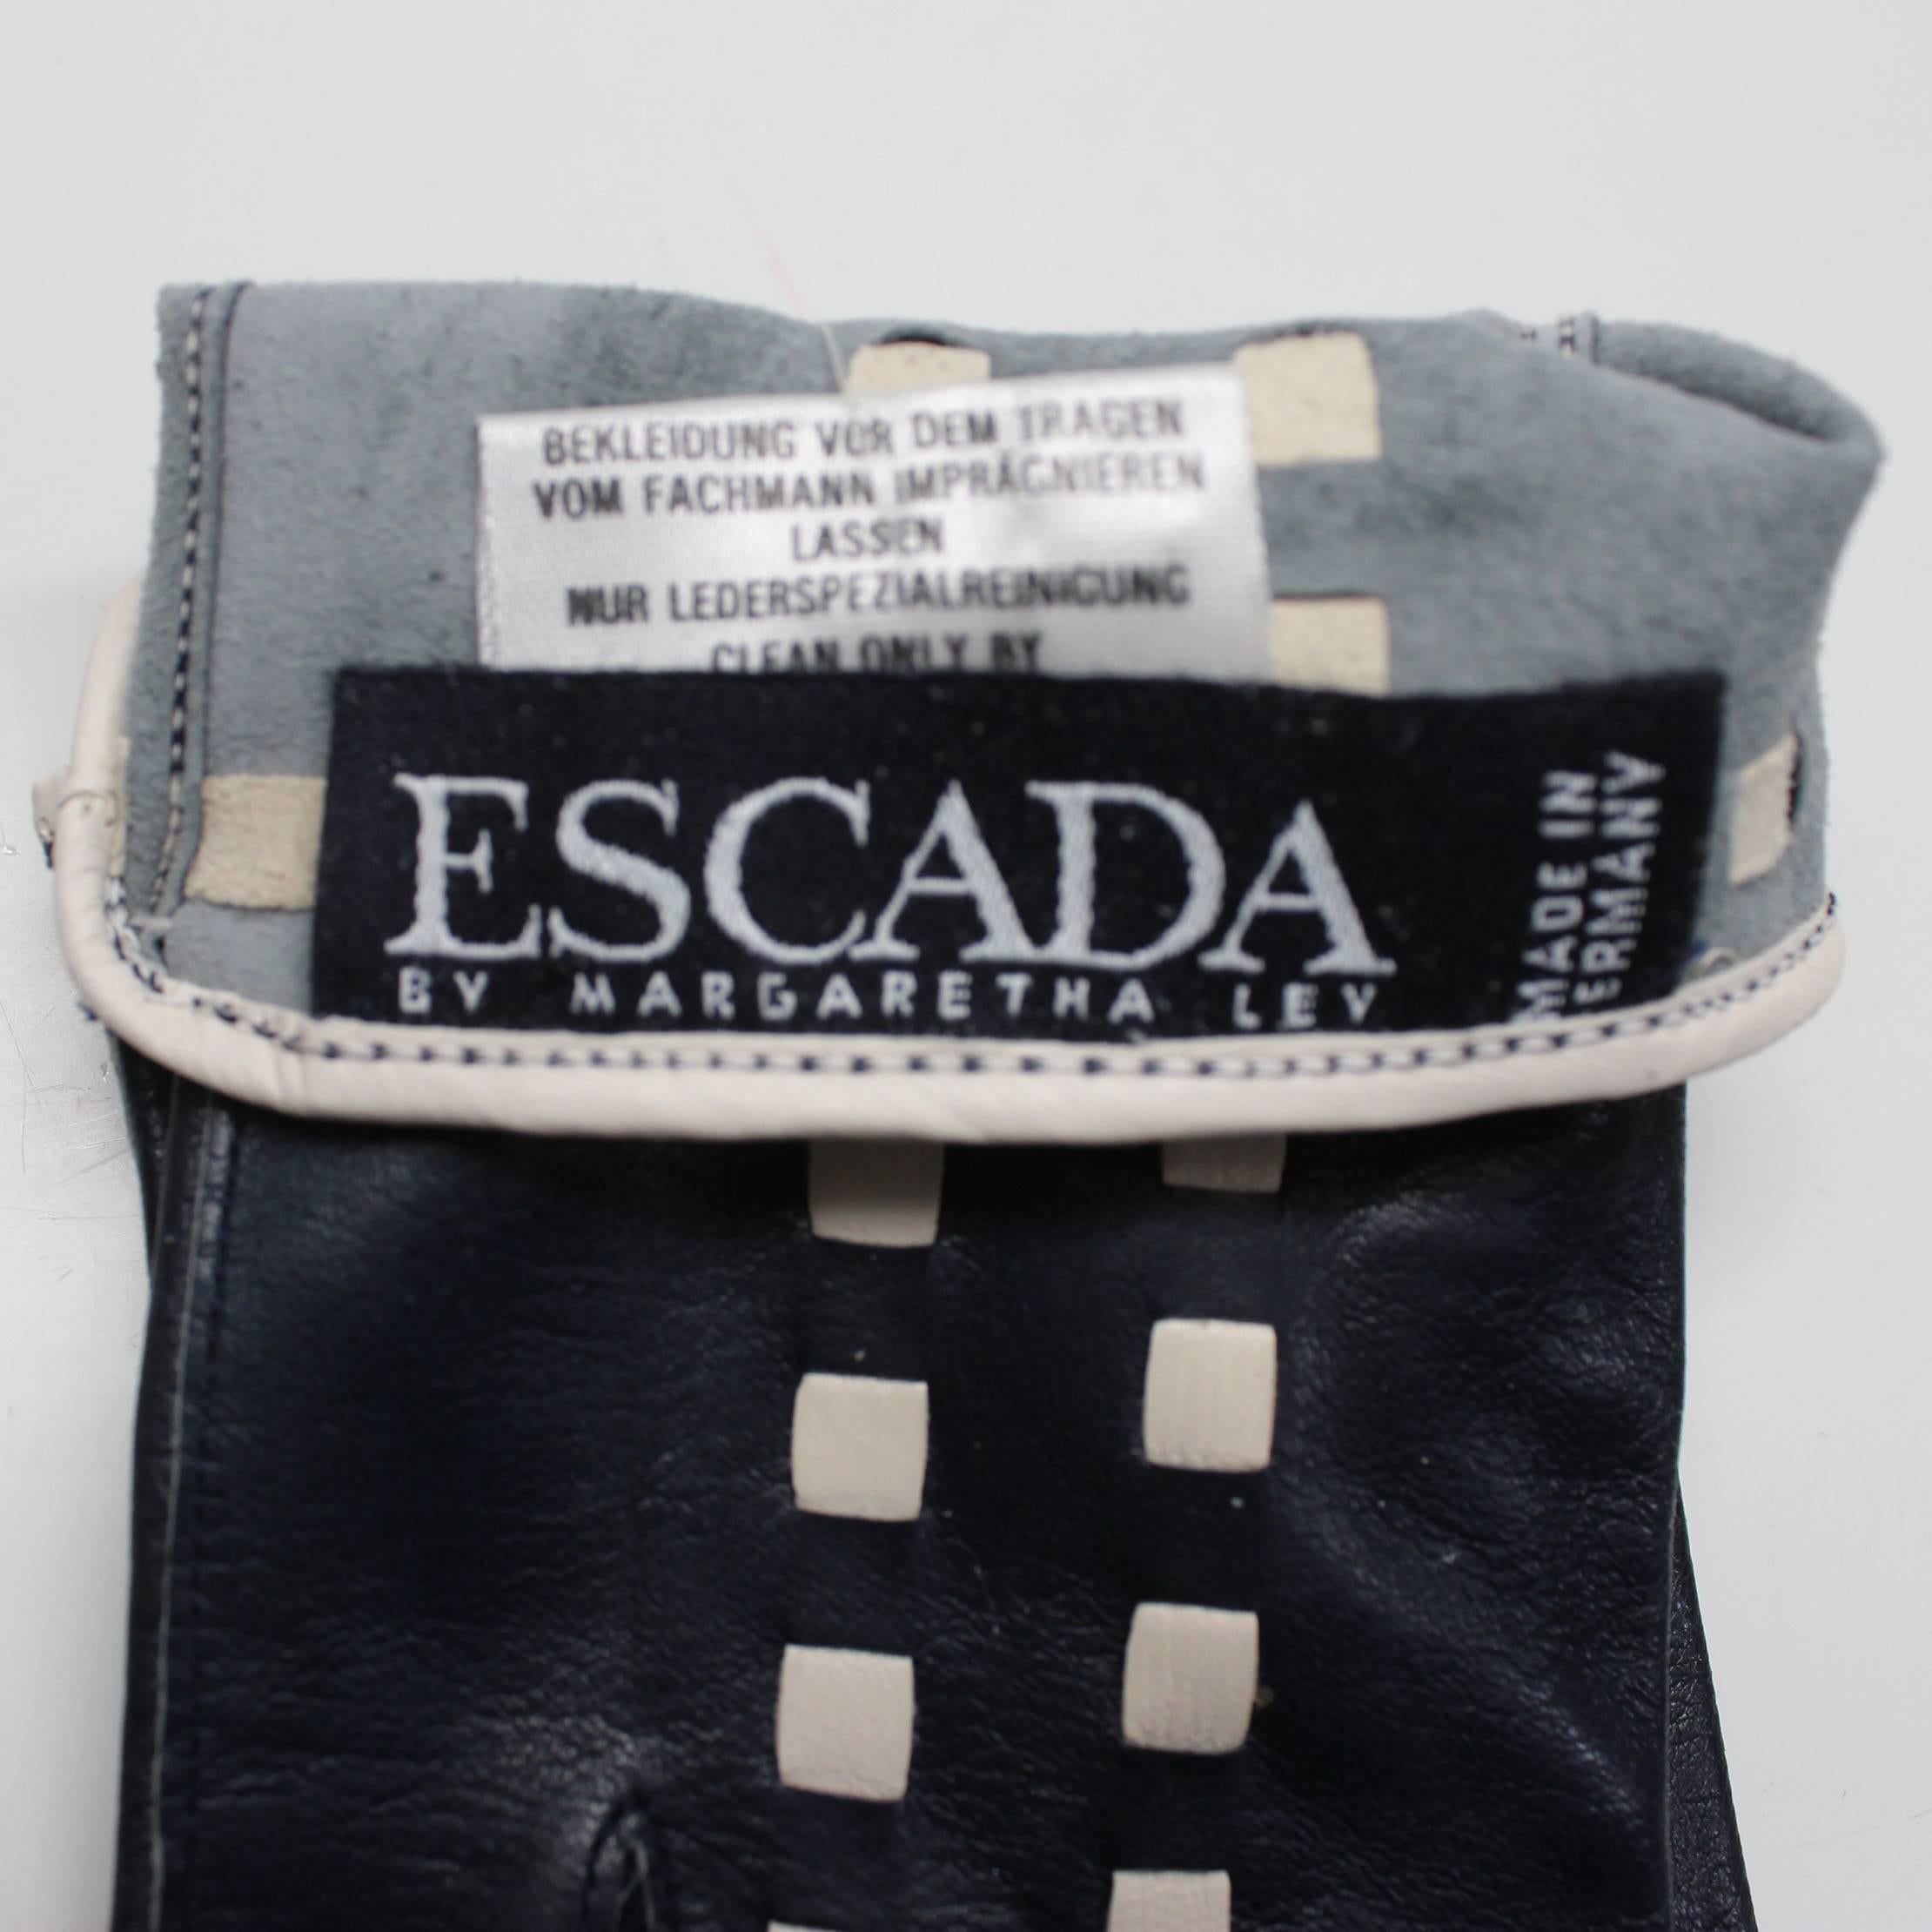 Women's 1980s Escada by Margaretha Ley Navy and White Leather Gloves, Never Worn For Sale